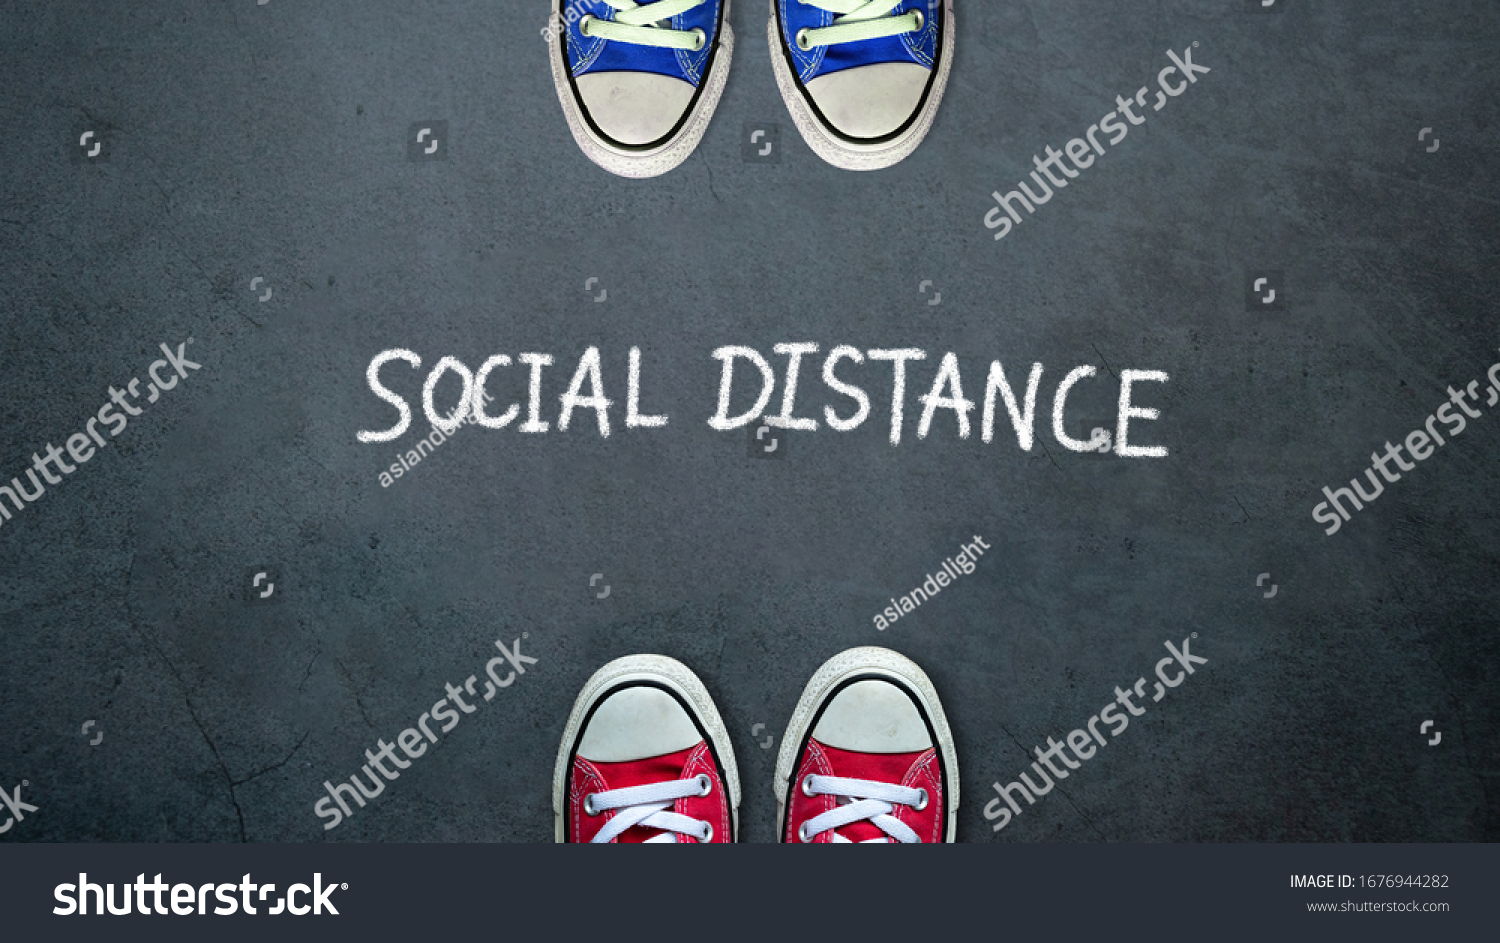 Social distance. two people keep spaced between each other for social distancing, increasing the physical space between people to avoid spreading illness during transmission of COVID-19 outbreak #1676944282